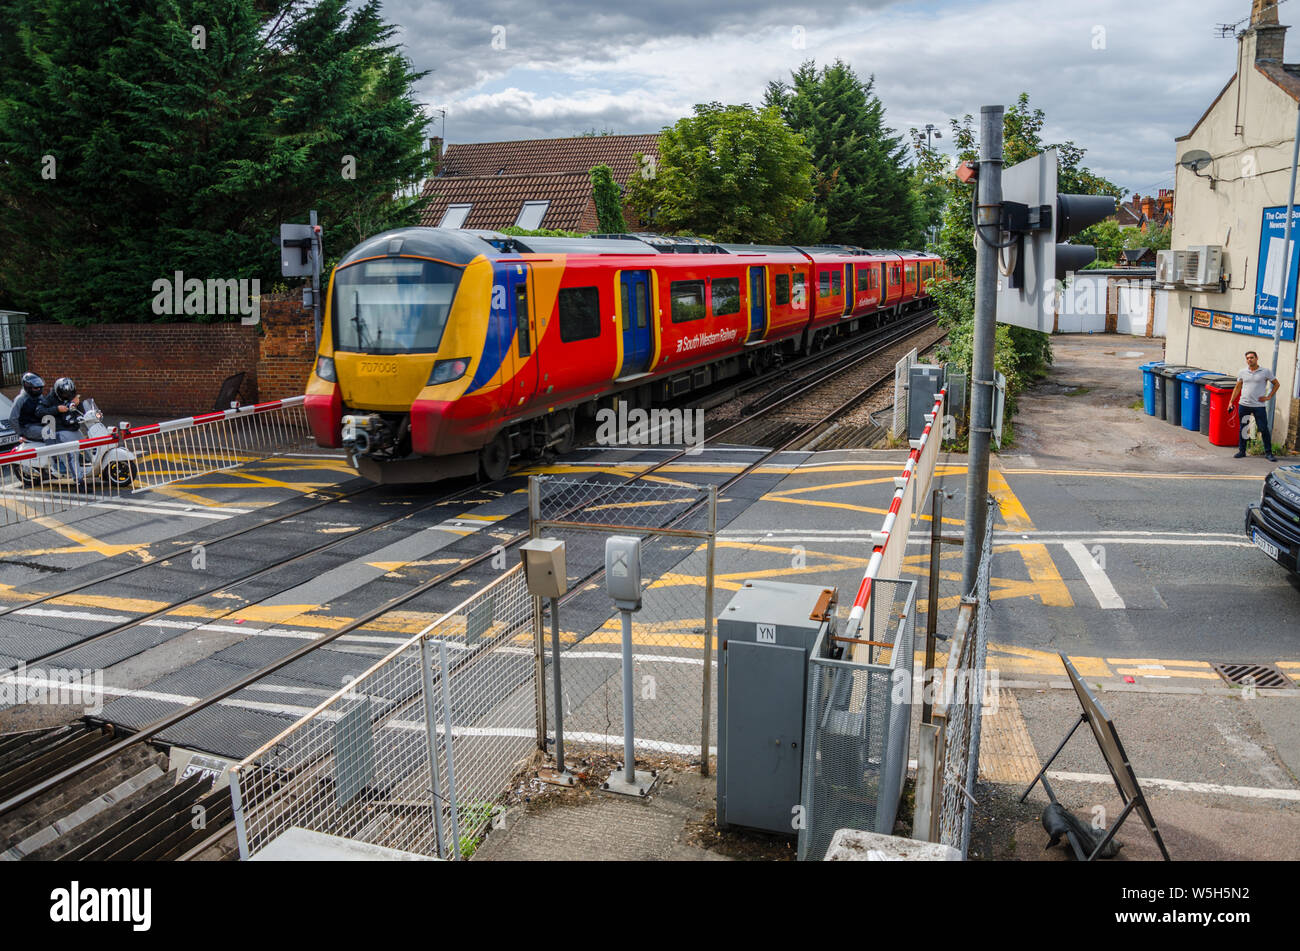 A South Western Railway train passes through a level crossing  at Datchet in Berkshire, UK Stock Photo